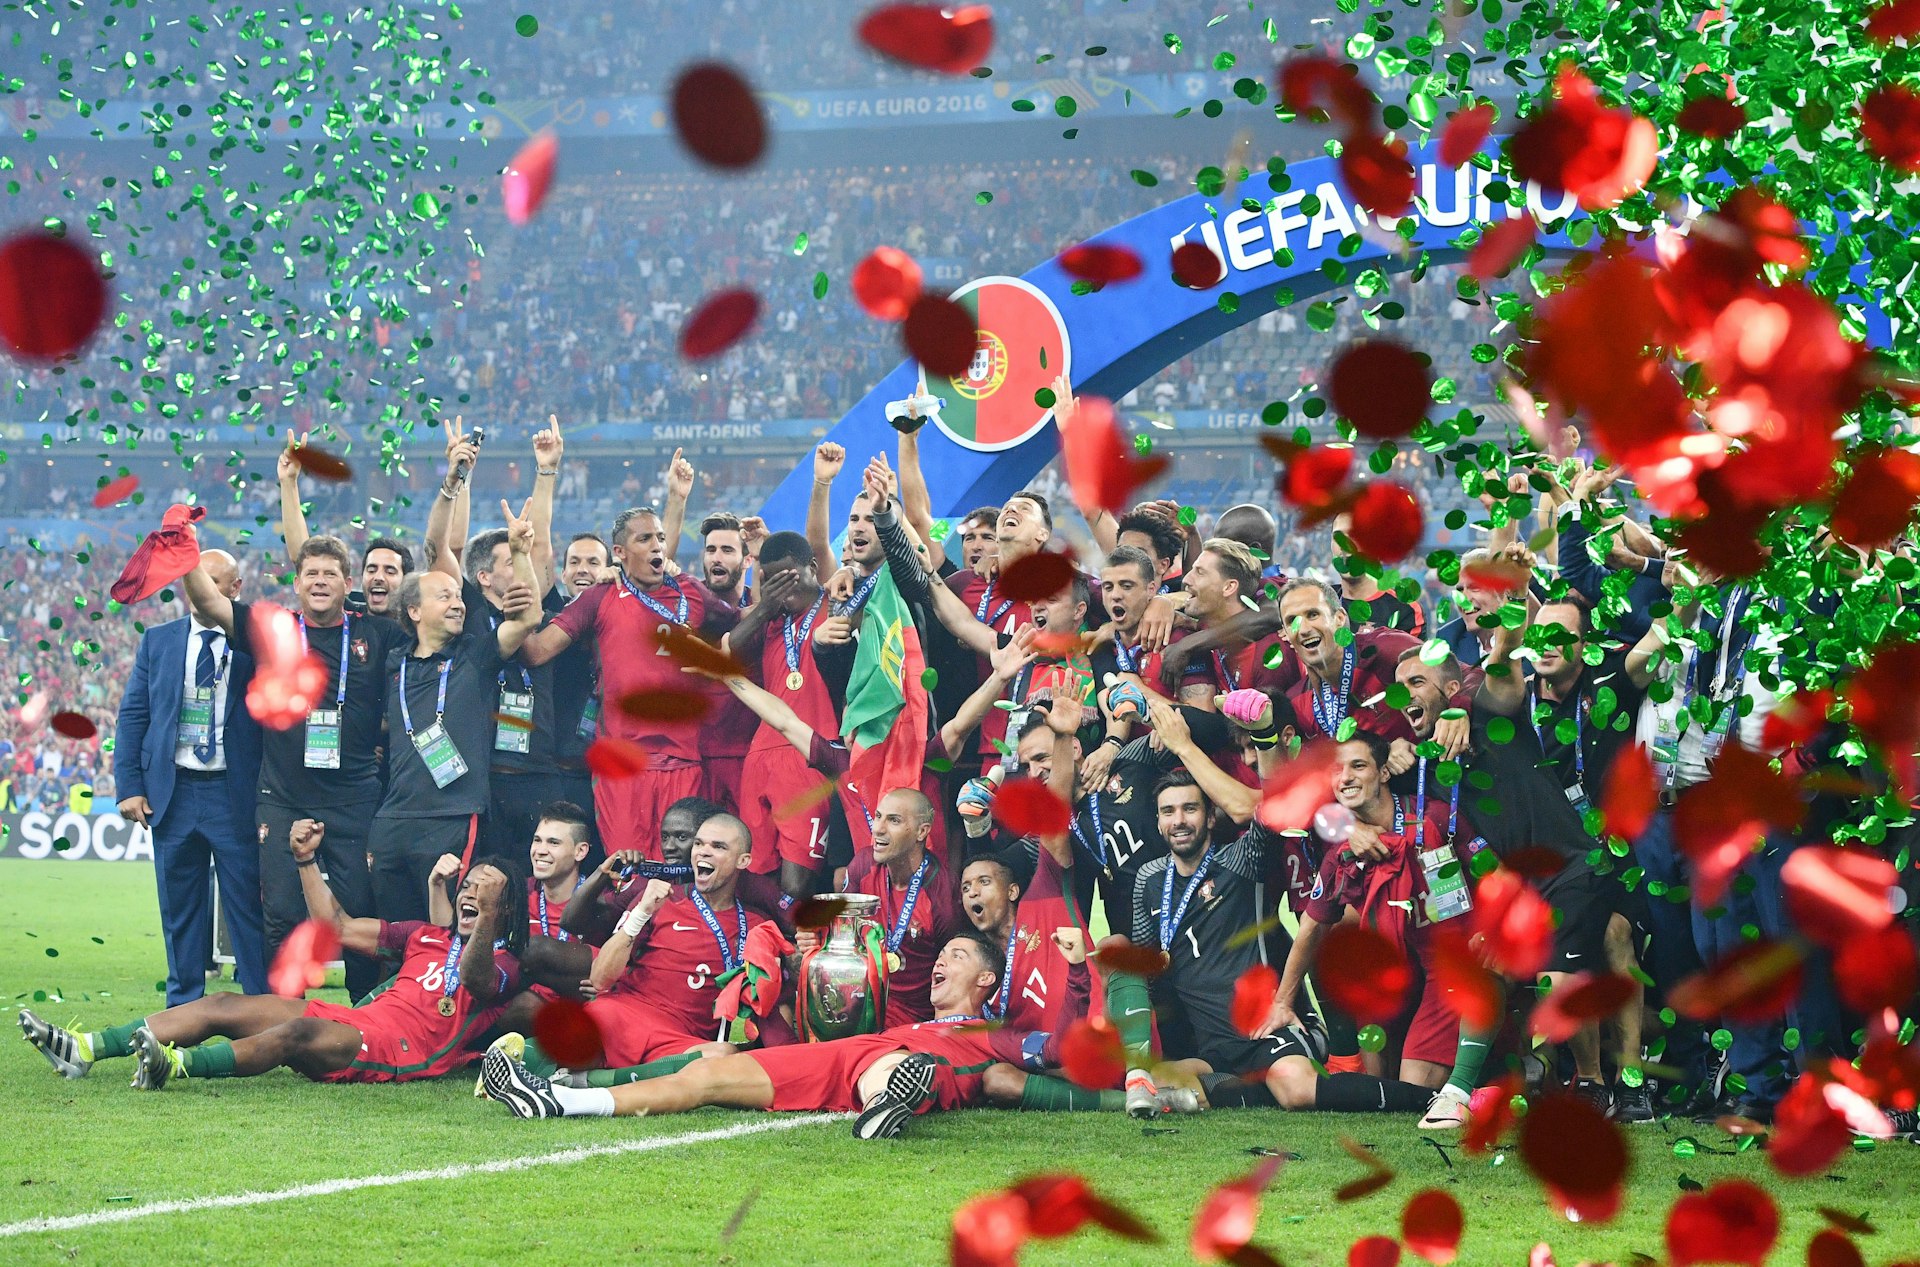 The Portuguese team posing for a celebratory photo on on the pitch amidst red and green confetti after winning the European Championships in 2016. 